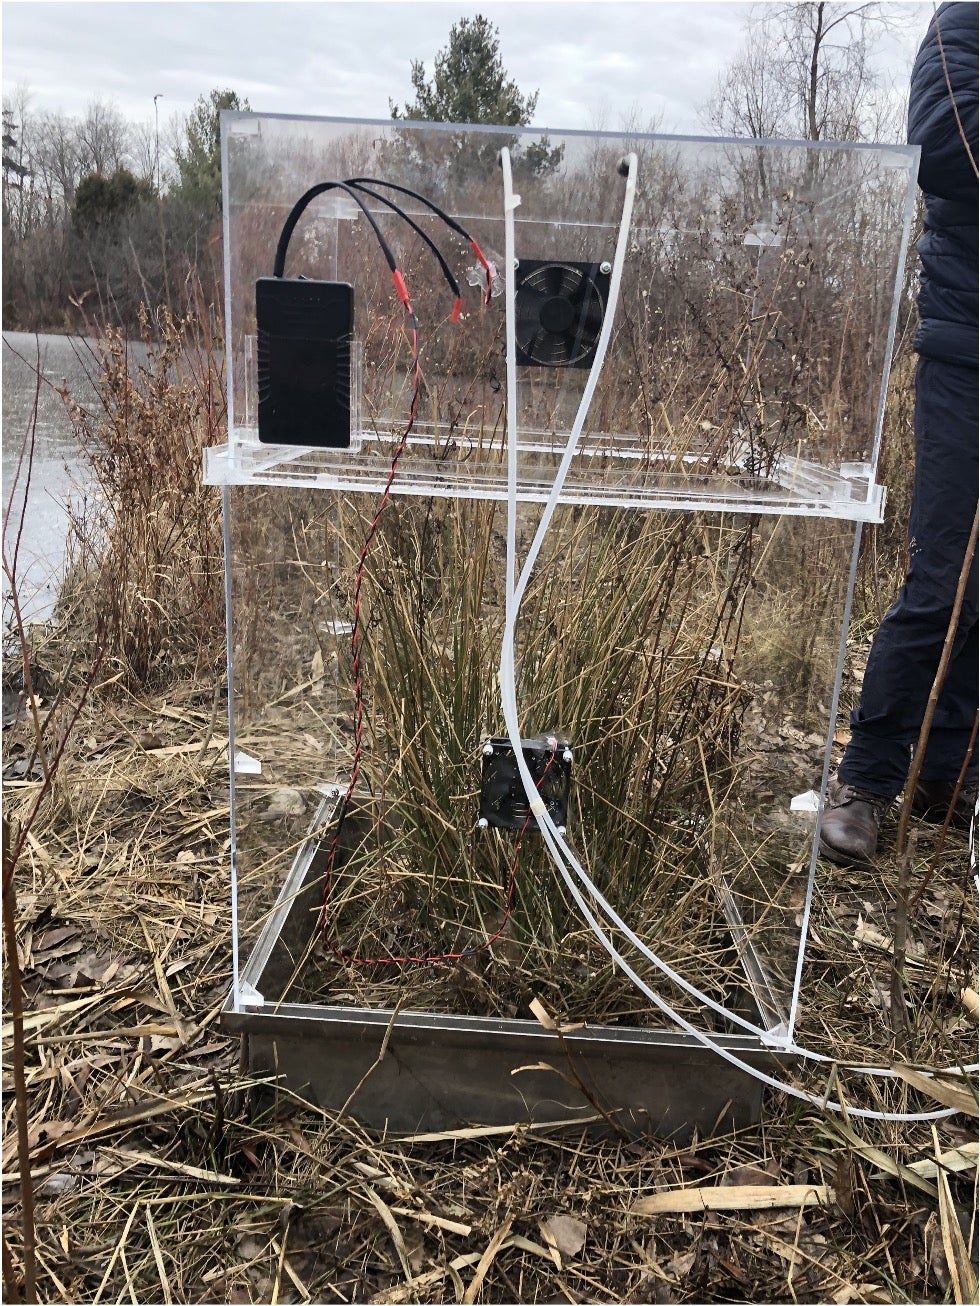 An experimental setup at a stormwater pond in Kitchener, Ontario